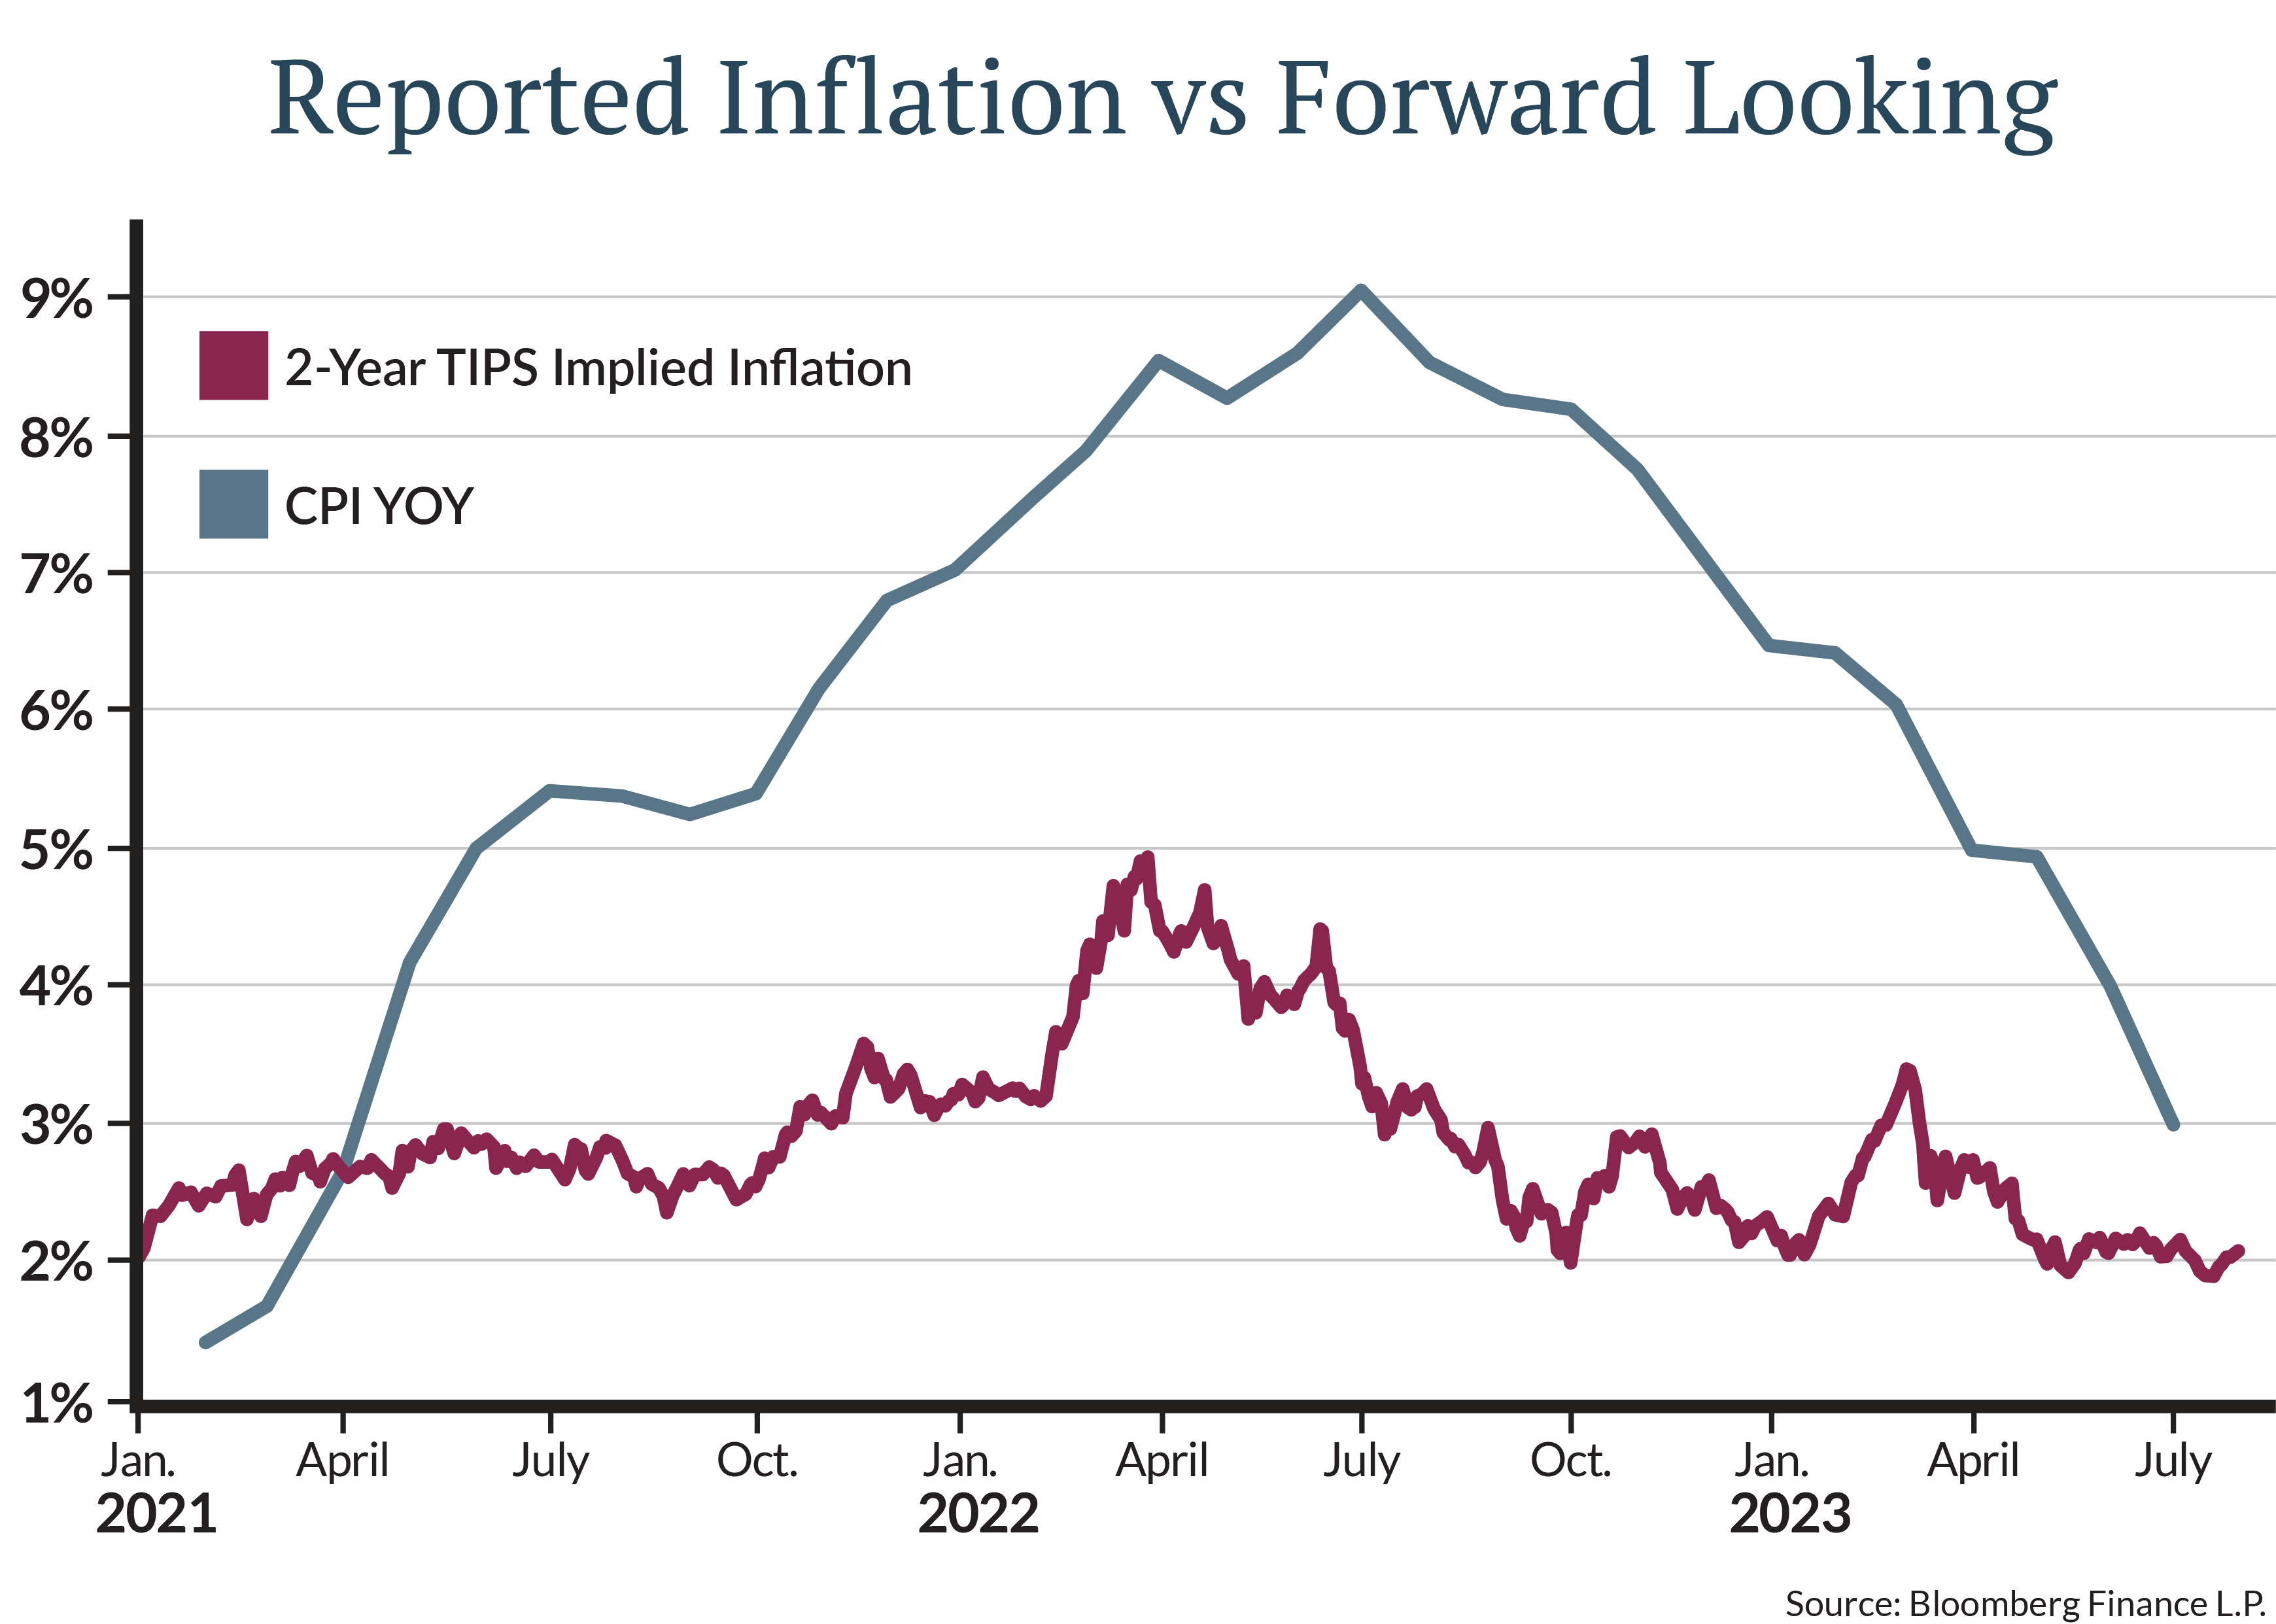 Inflation, too, remains elevated. While inflation has come down from a 40-year high hit  last summer, the consumer price index at 3% is still too high for the Fed [Figure 2], especially with core inflation (excluding volatile food and energy) still up 4.8% from a year earlier.